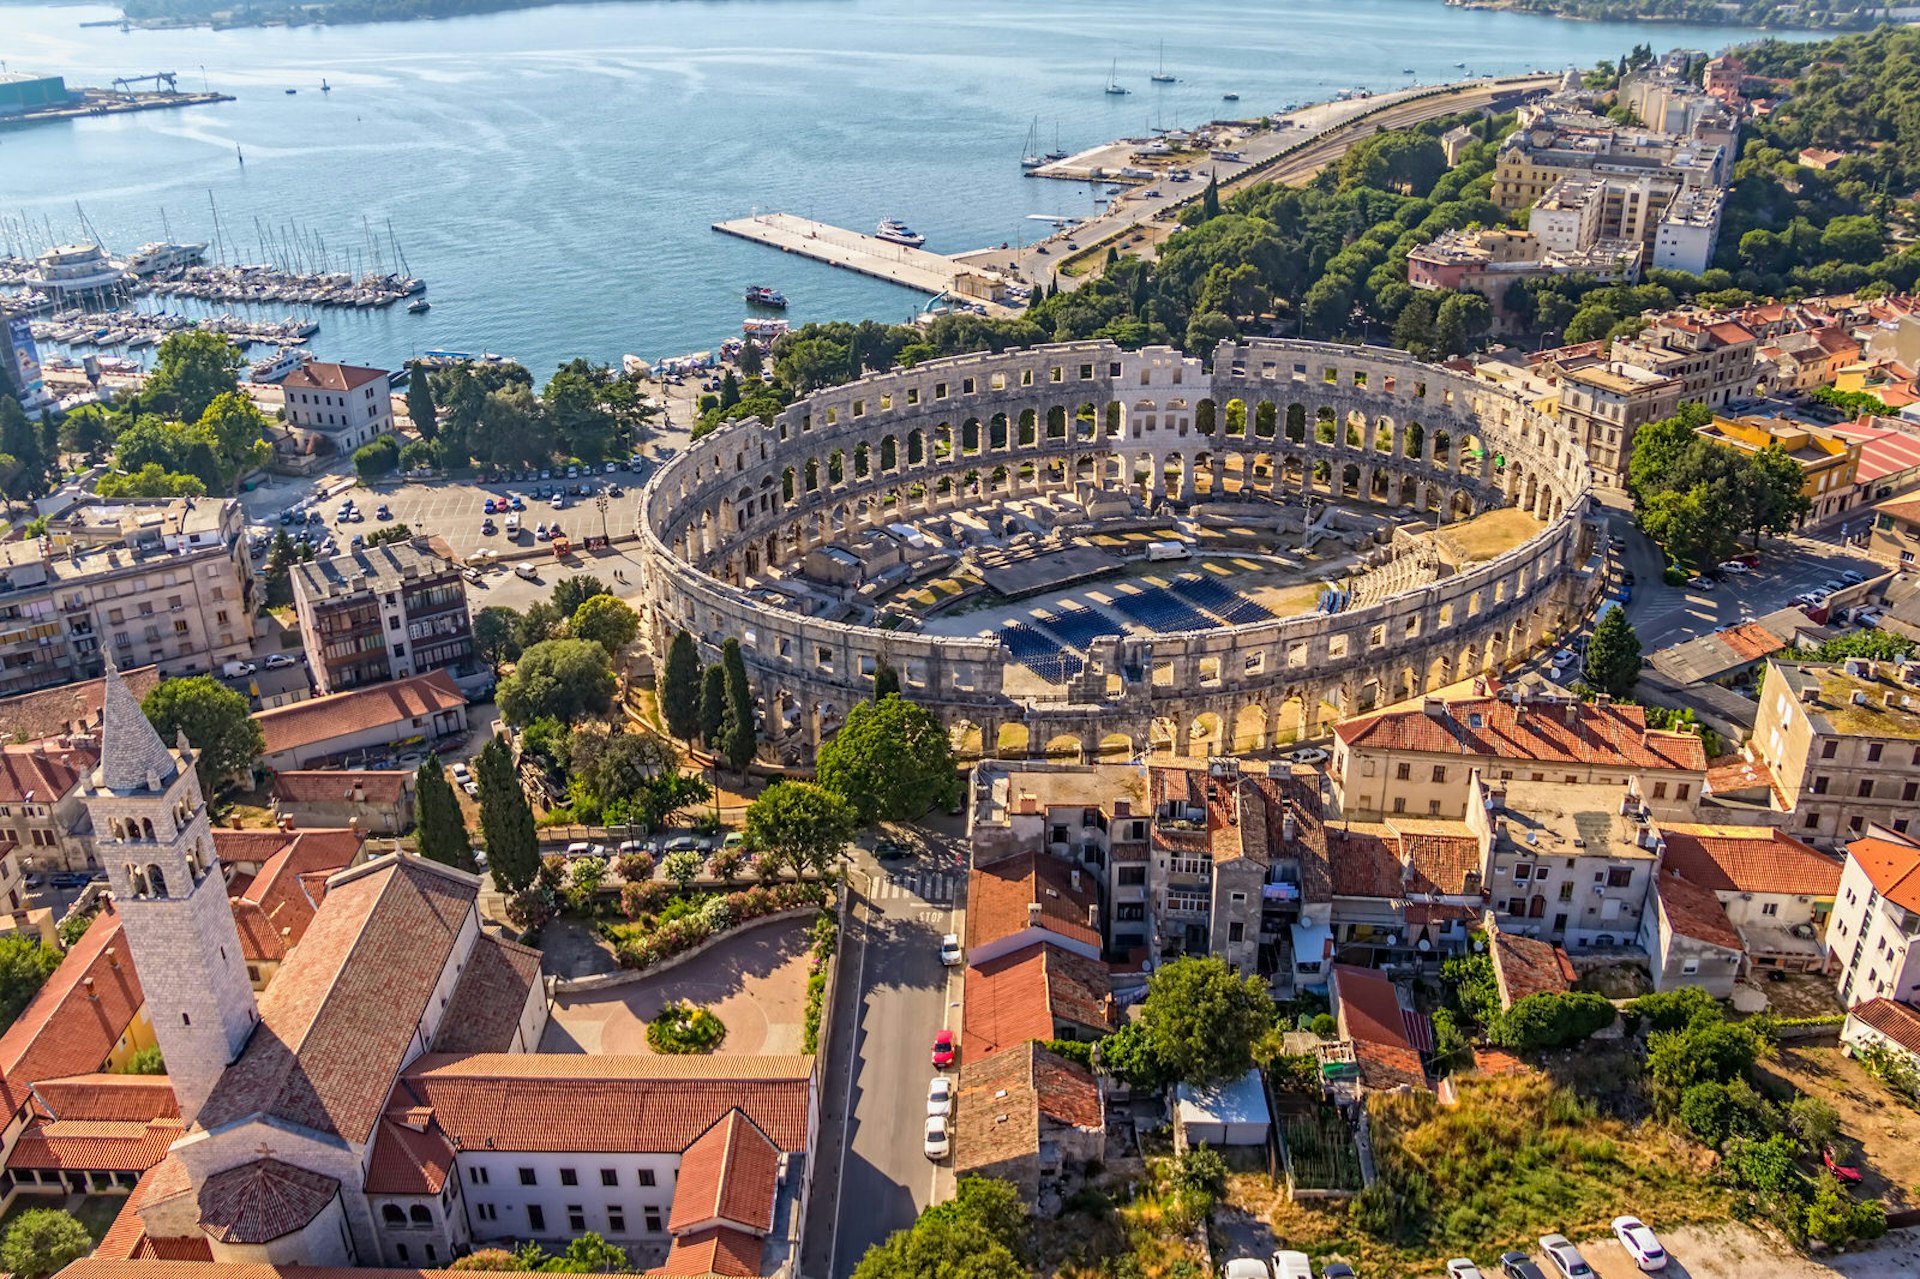 Pula's incredibly well-preserved Roman amphitheatre